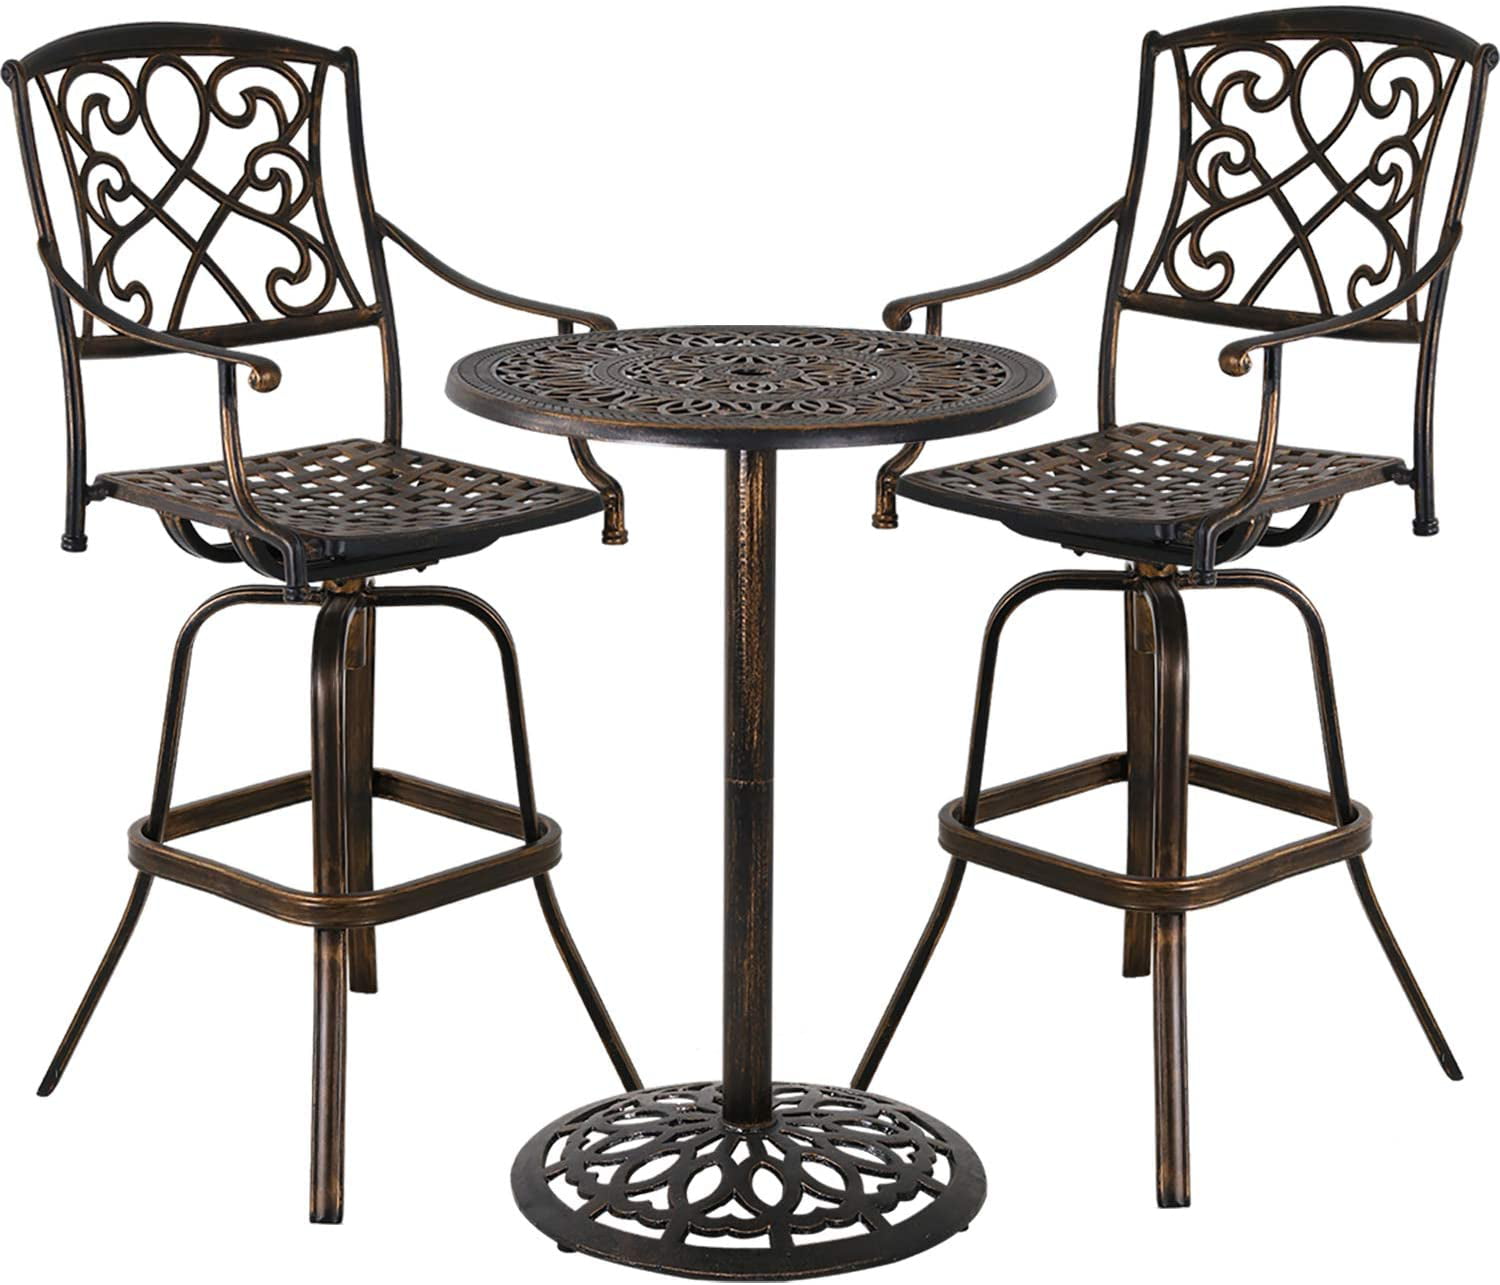 Bar Table And Stool Outdoor, Outdoor High Bar Stool And Table Set